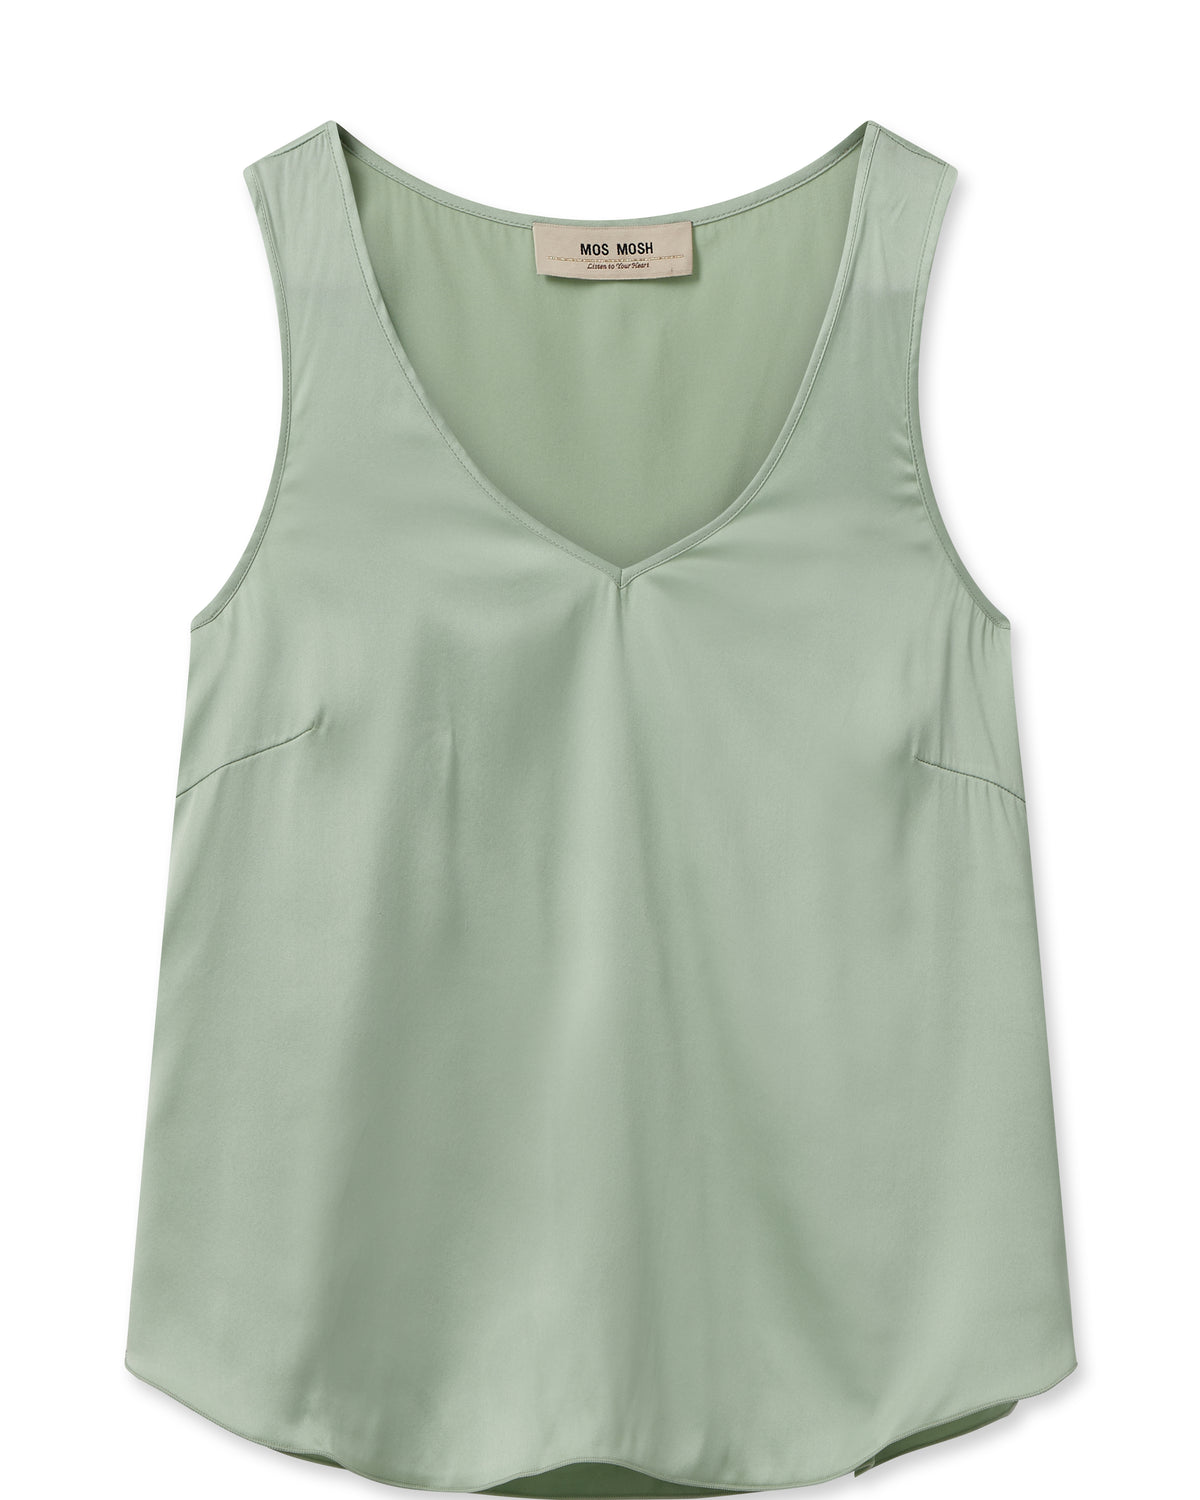 Sage green silk camisole with a v neck